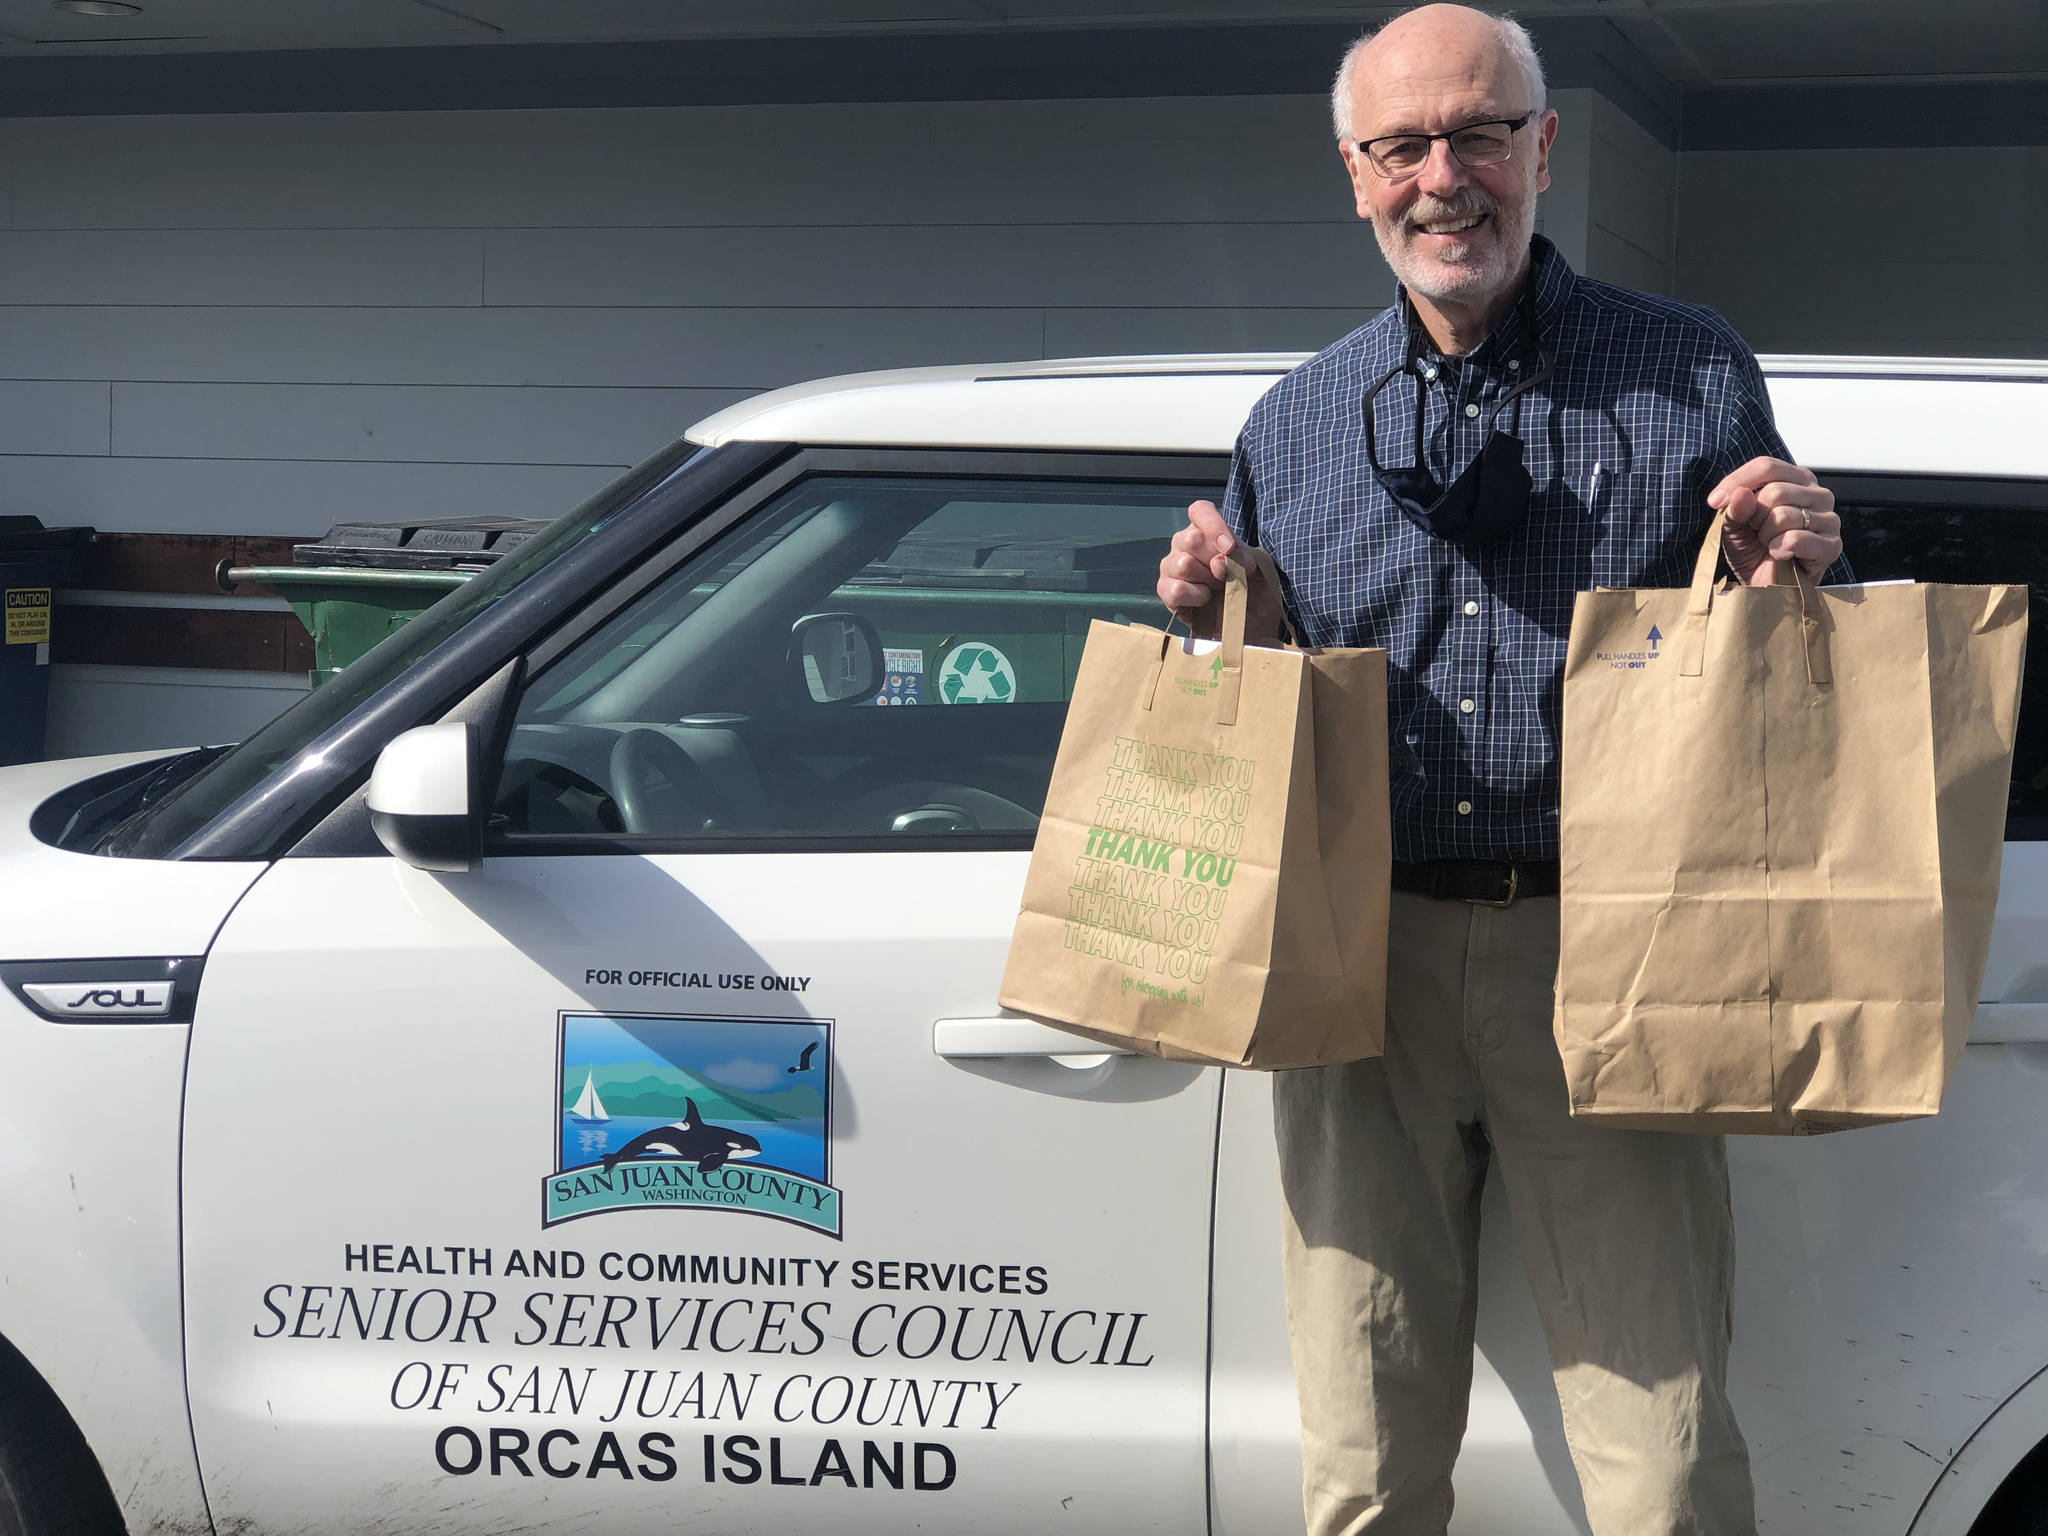 Colleen Smith/staff photo
Celebrity volunteer Orcas Chamber of Commerce Executive Director Lance Evans helped deliver hot meals as part of the March for Meals.